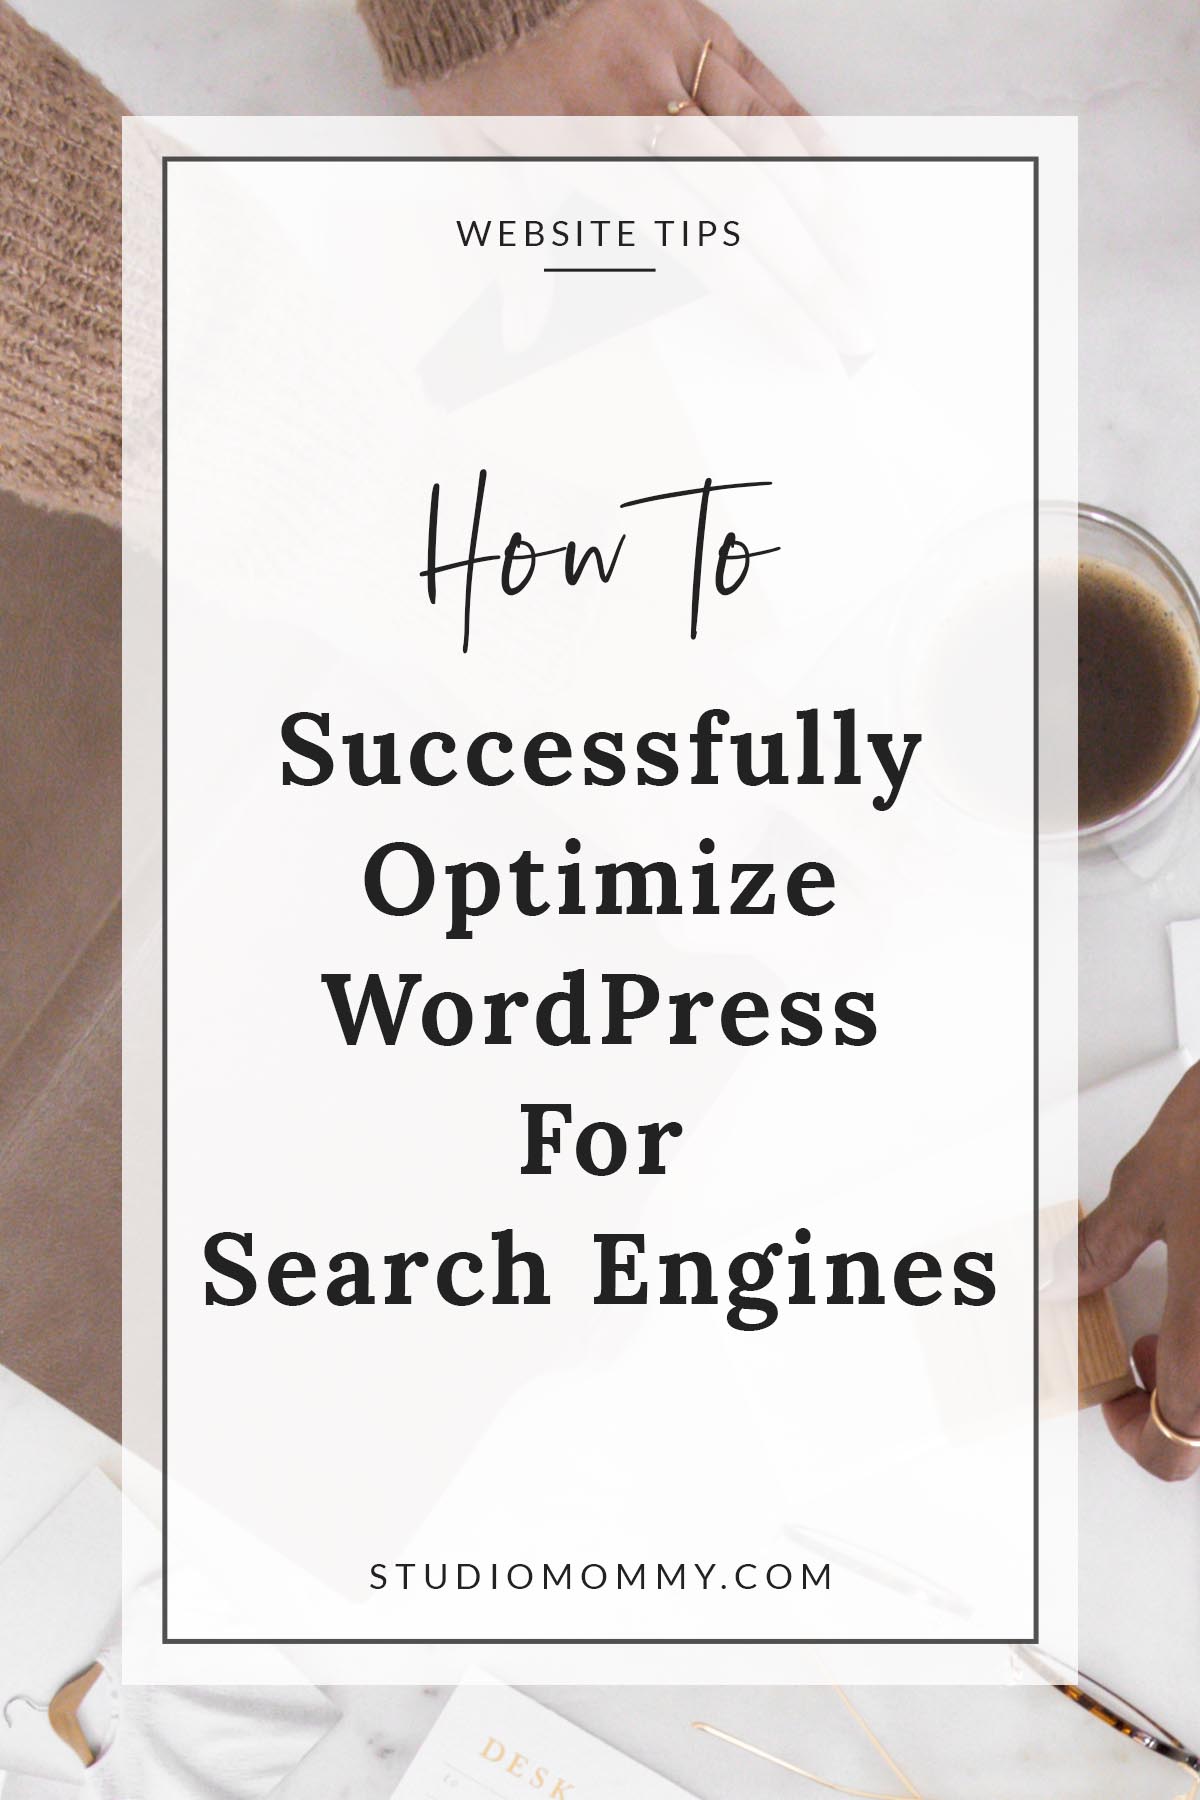 Optimize WordPress for Search Engines